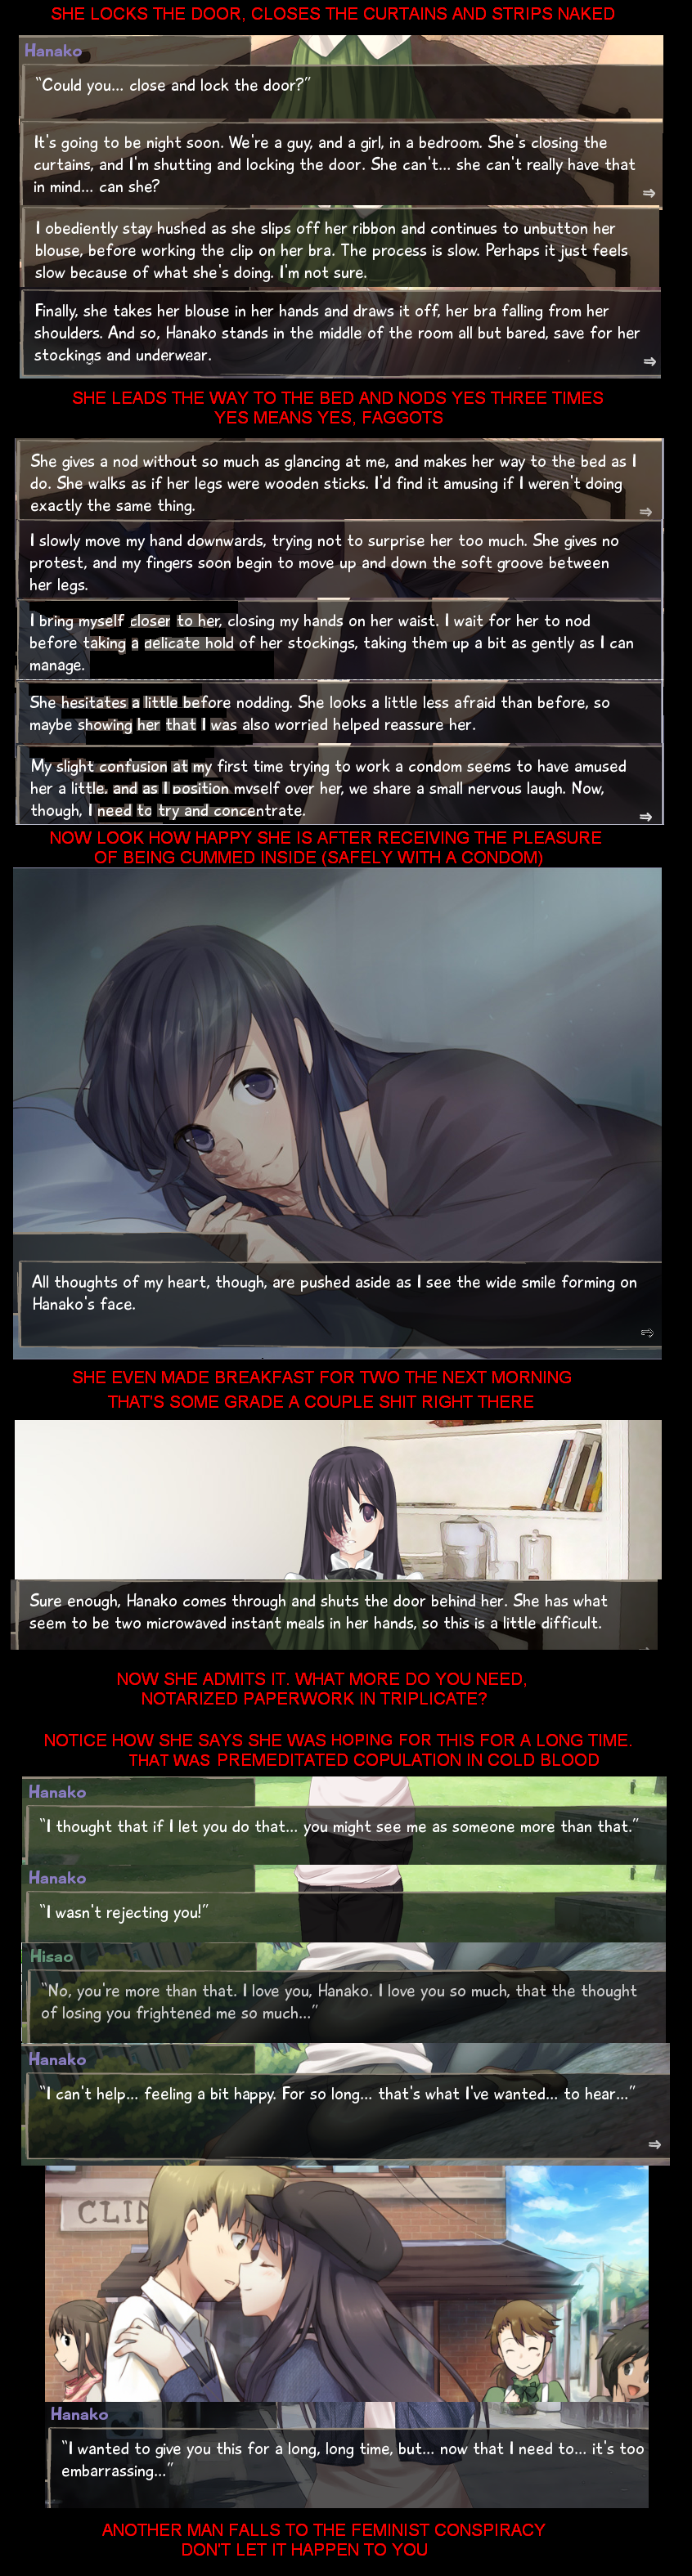 Hanako+wanted+to+sleep+with+Hisao+because+she+thought+that+s+_59f39881d57b24f0d5d2a24f904e1be9.png